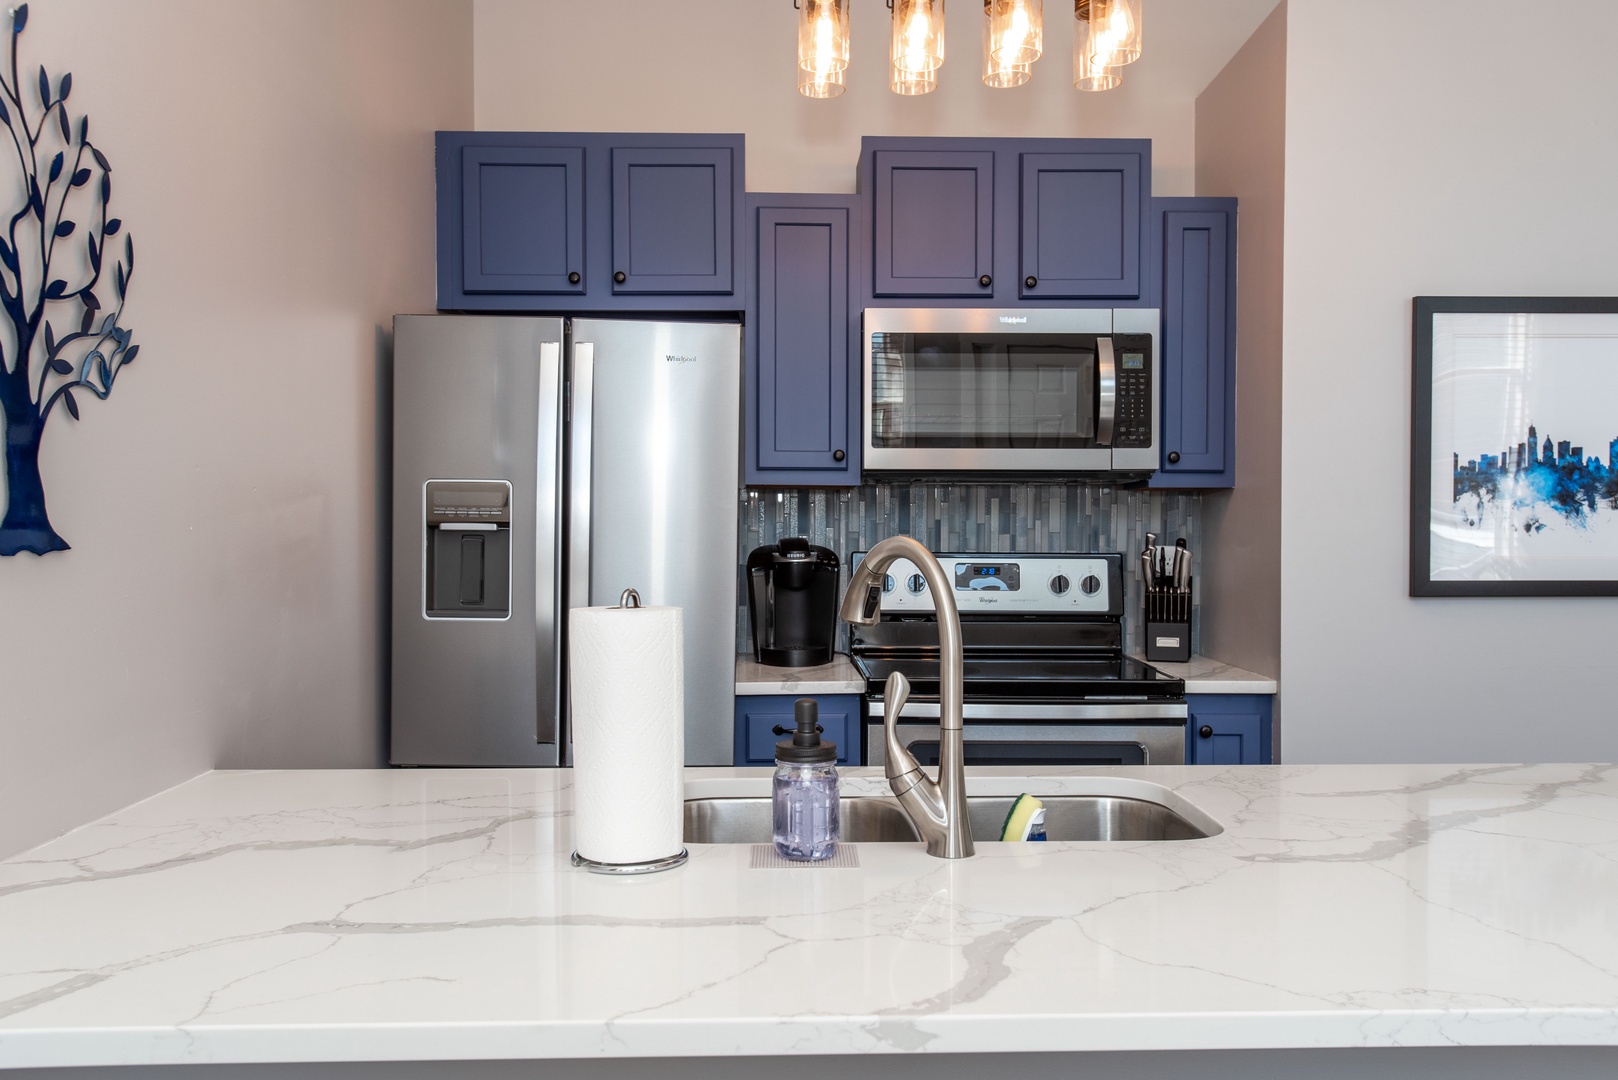 Apt 1 – The polished kitchen offers ample space & all the comforts of home